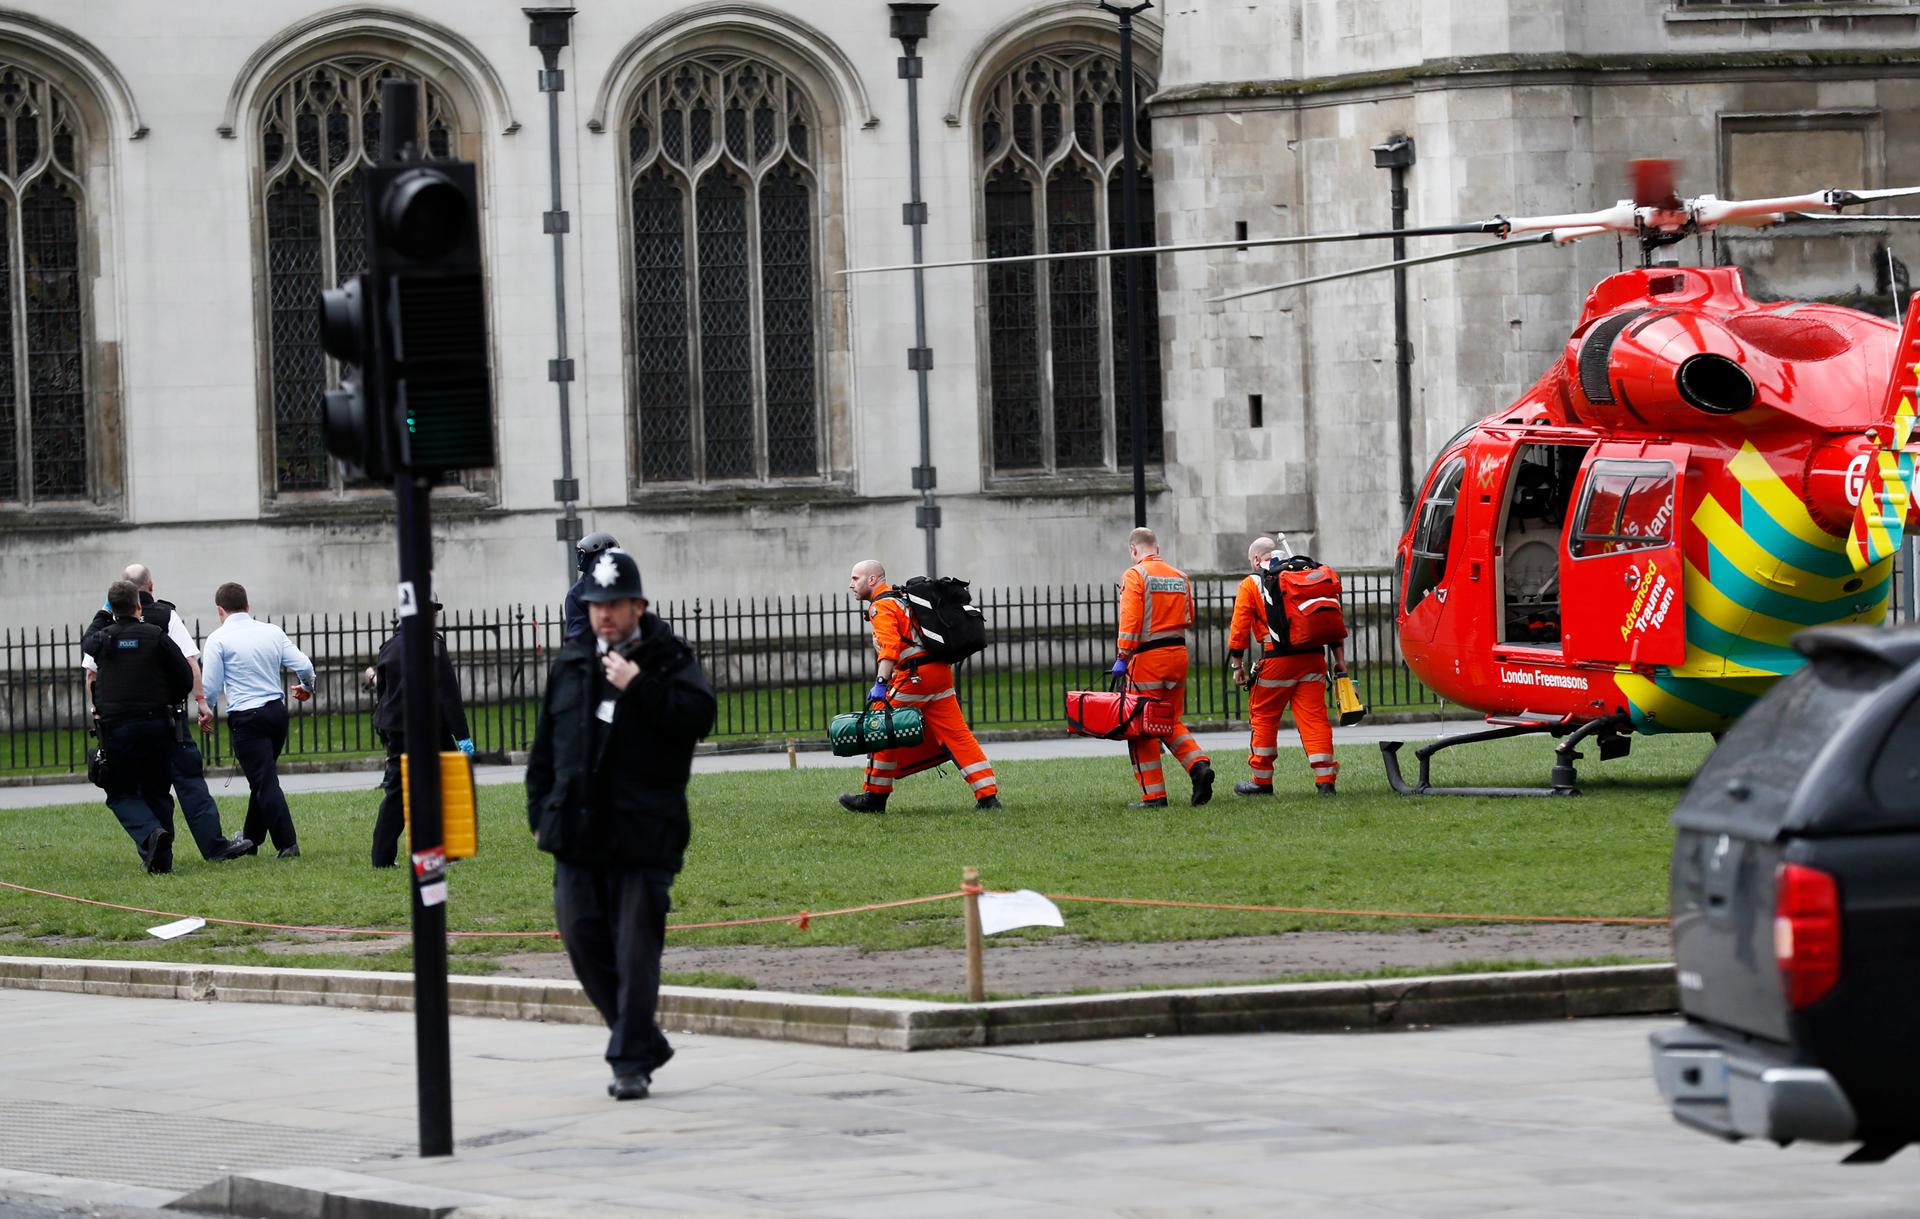 An air ambulance lands in Parliament Square